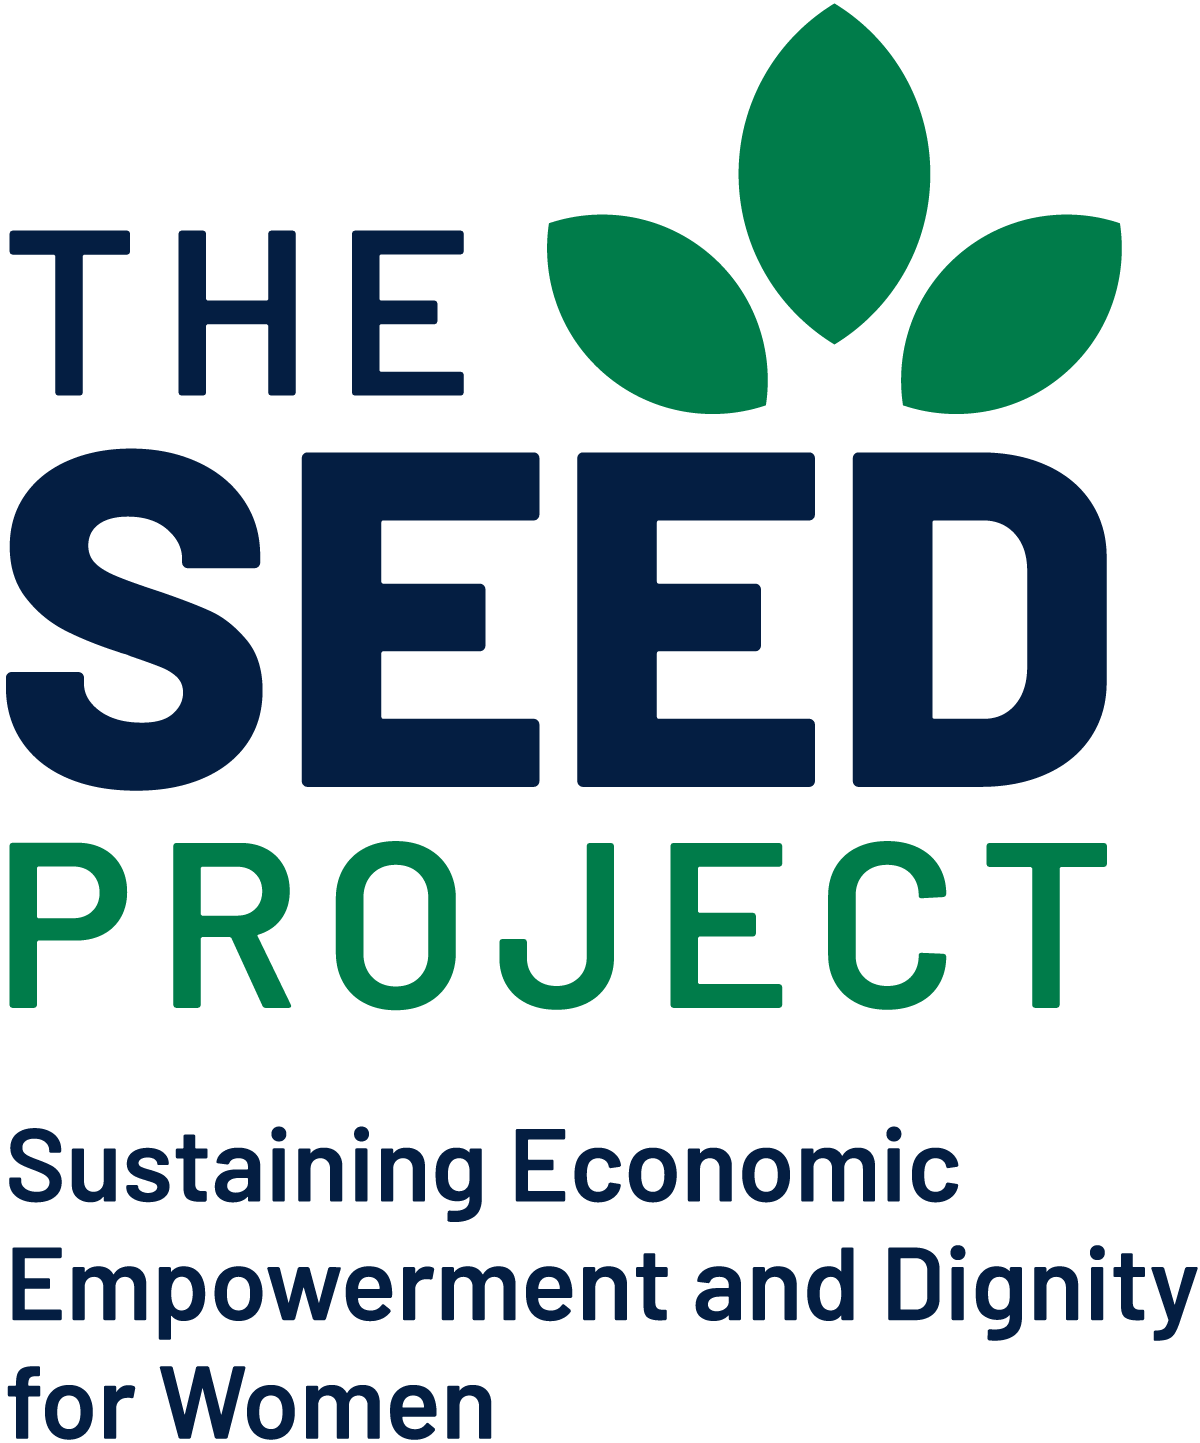 The SEED Project, Sustaining Economic Empowerment and Dignity for Women